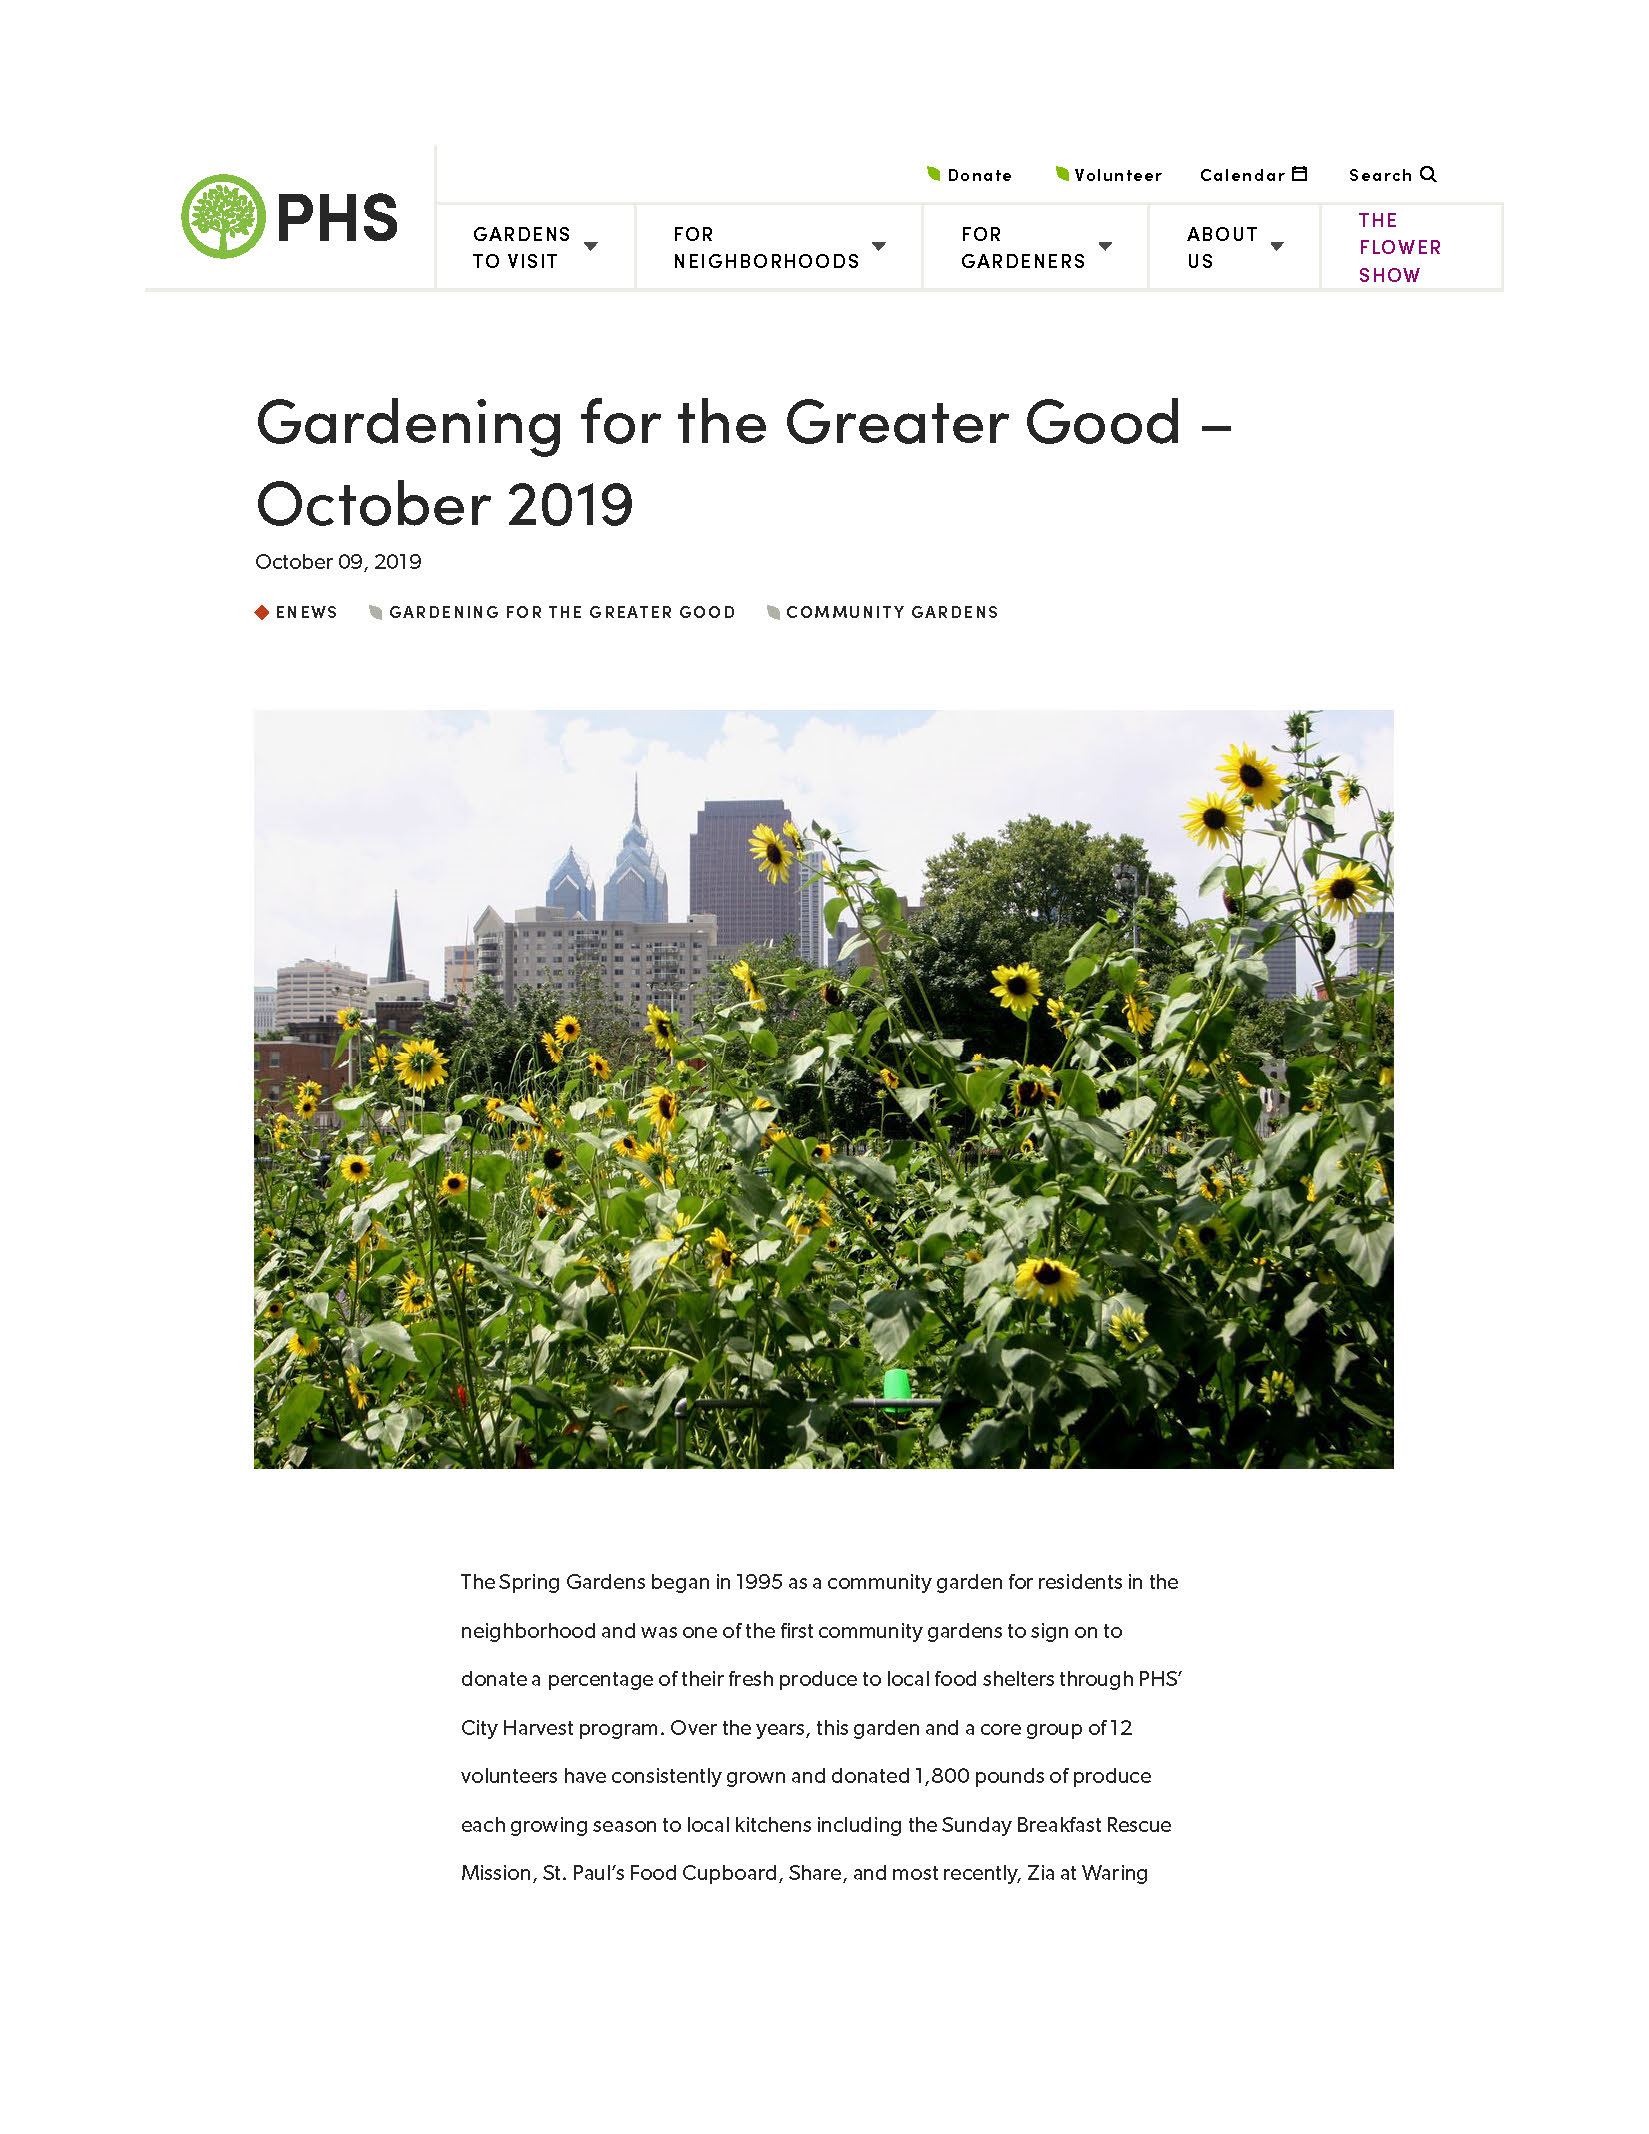 Gardening for the Greater Good - The Spring Gardens